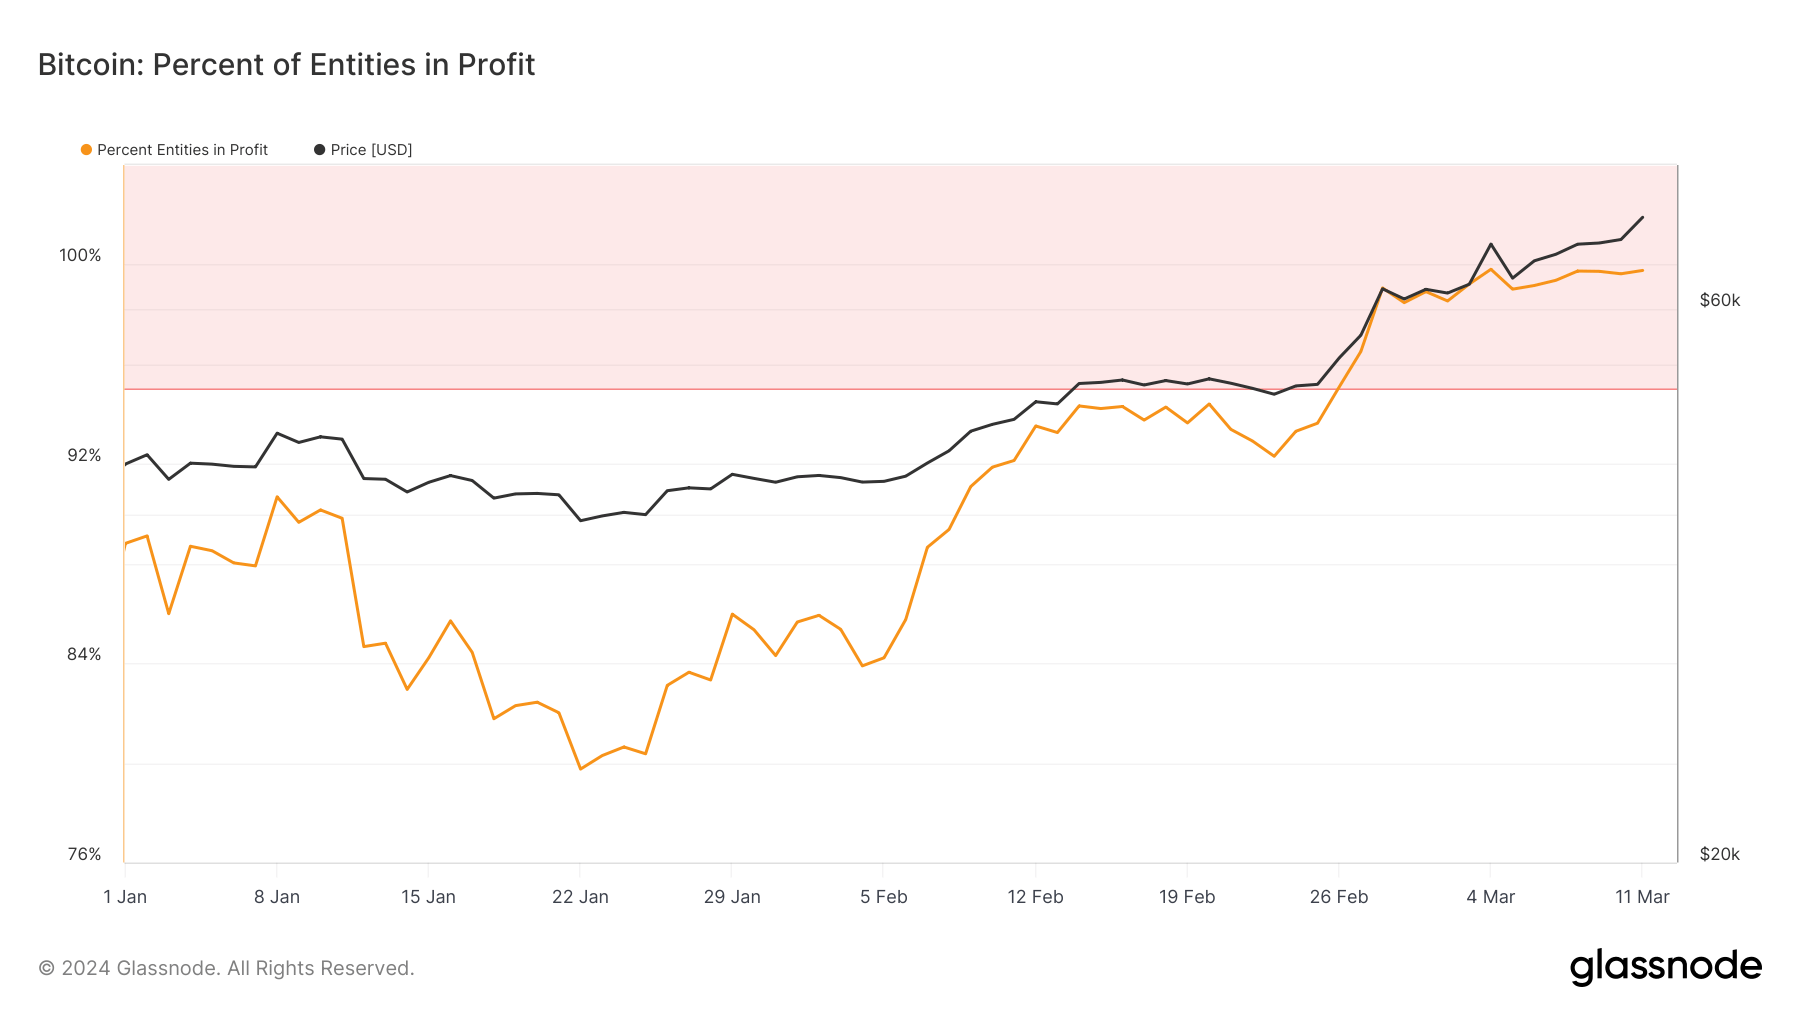 Bitcoin companies’ year-to-date profit margins